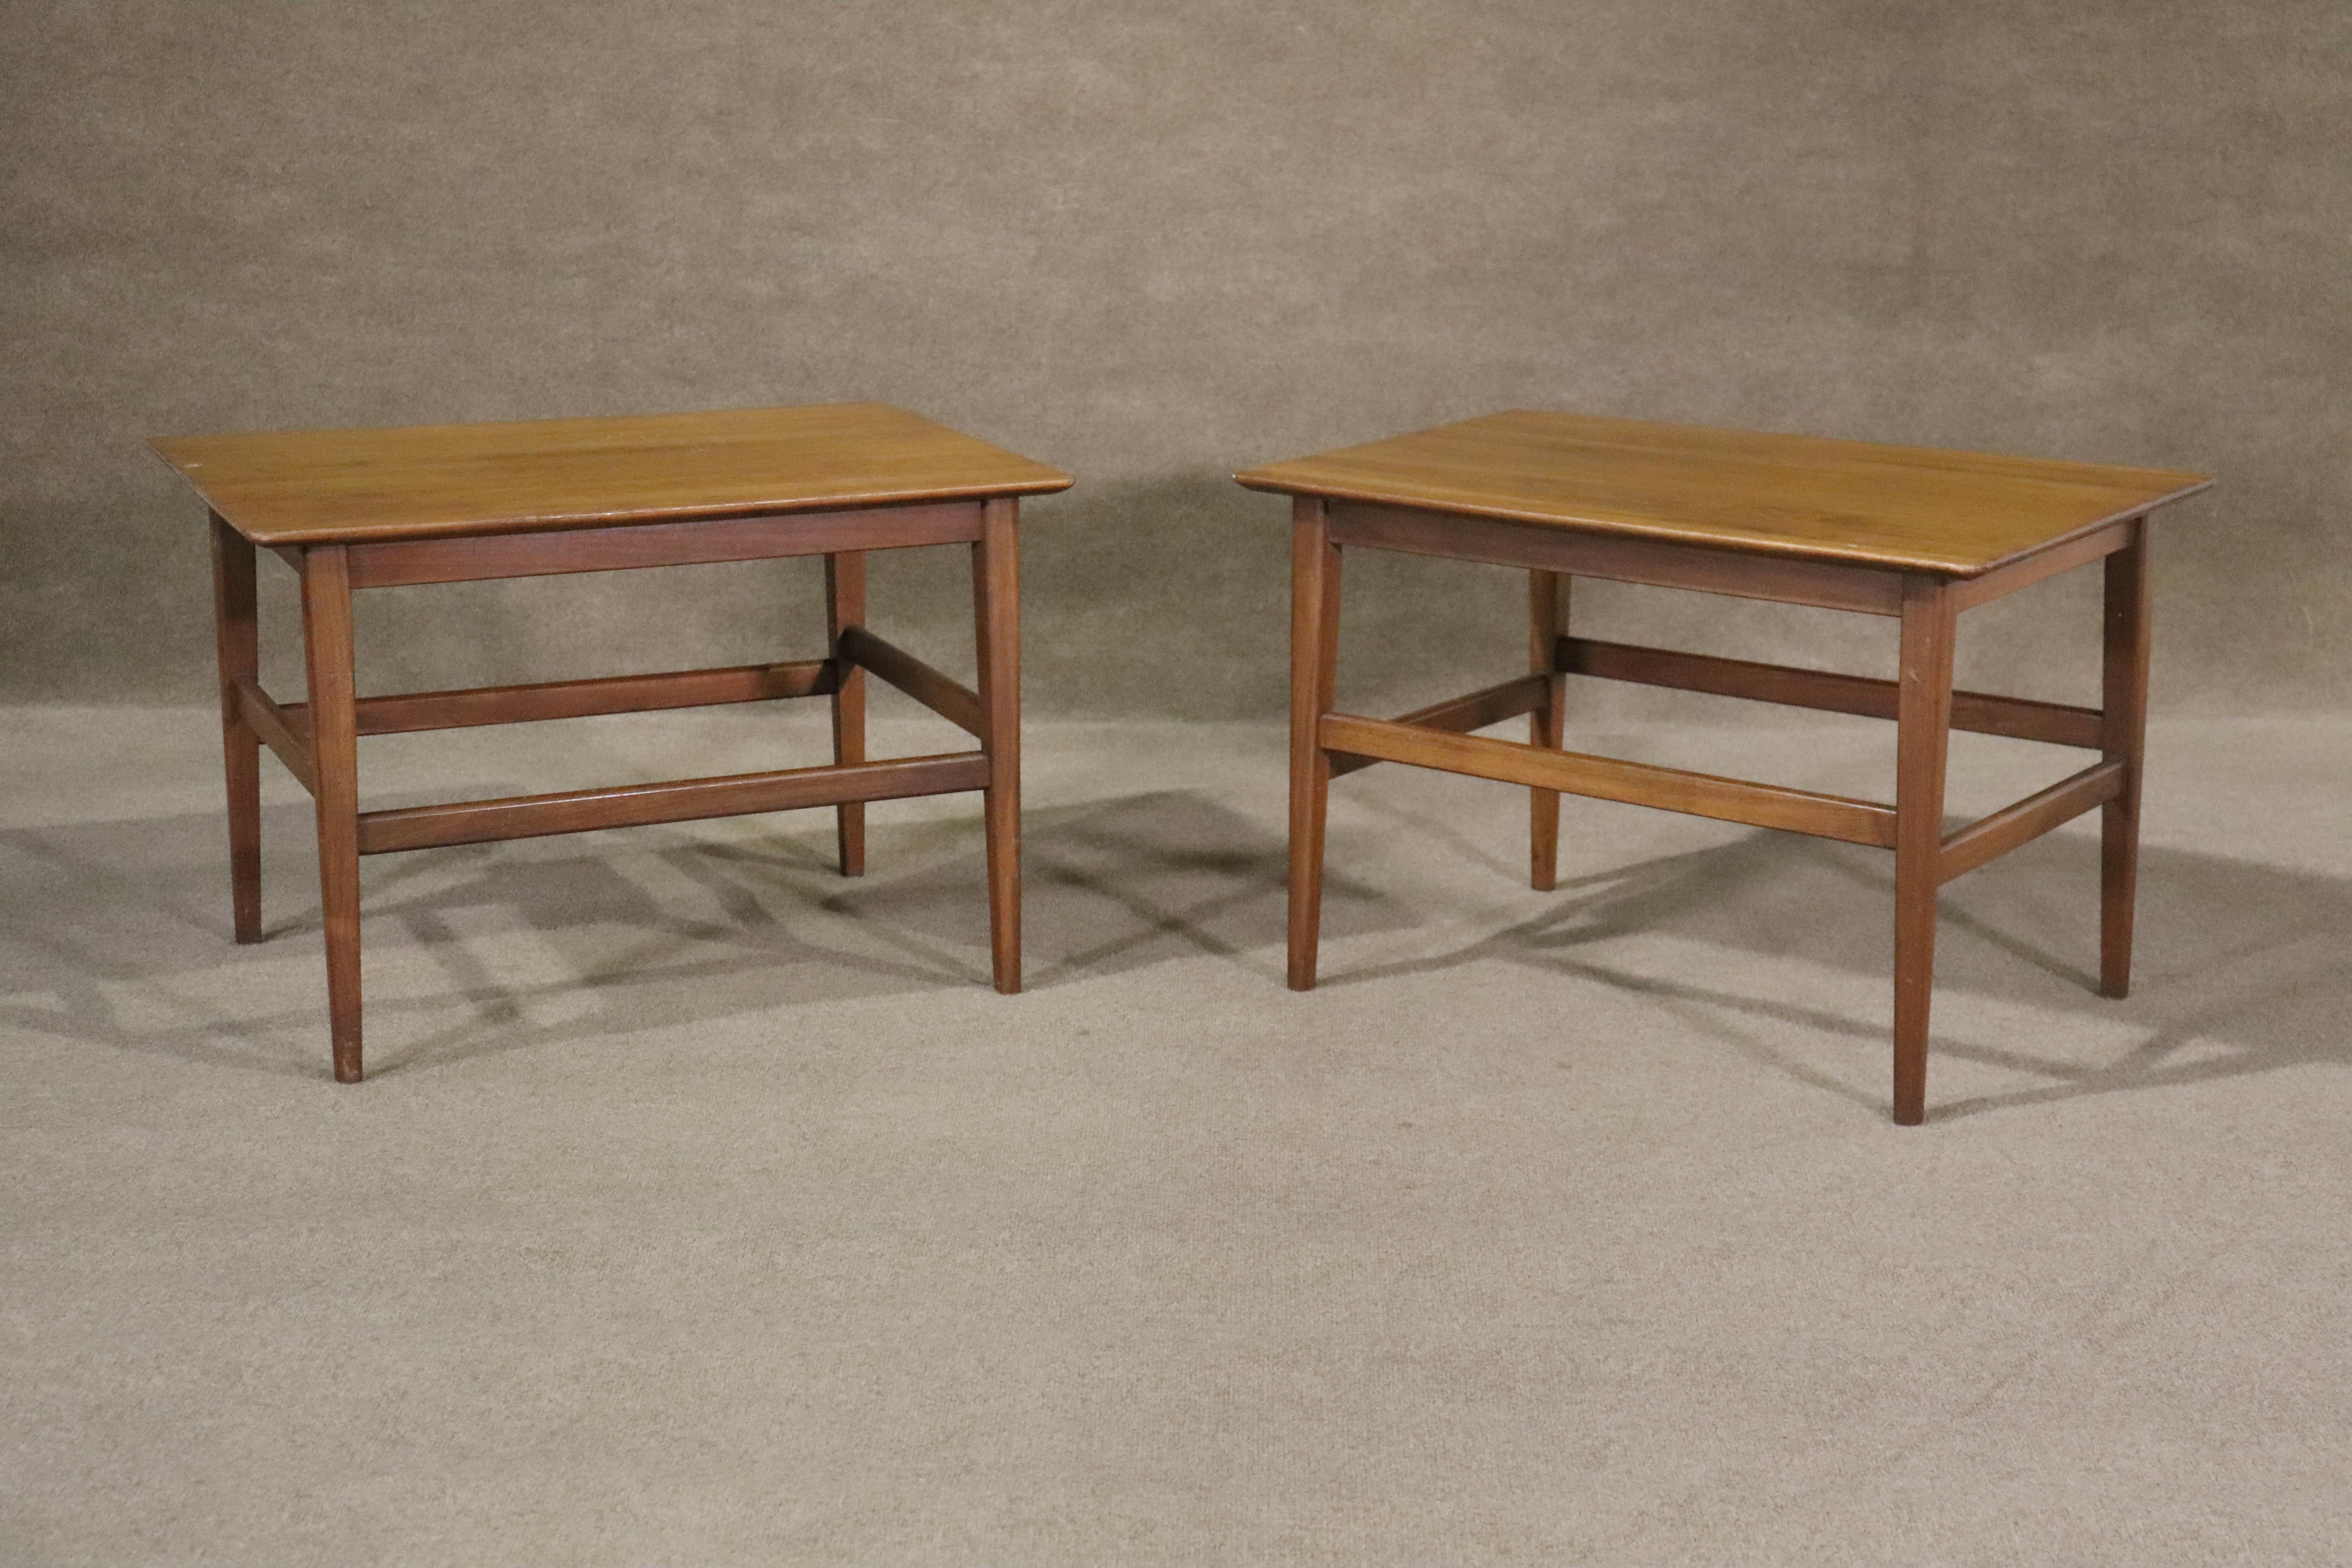 Pair of Mid-century modern walnut end tables fit for a variety of spaces besides just the bedroom. Large table top allows for lots of storage.

Please confirm location (NY or NJ)